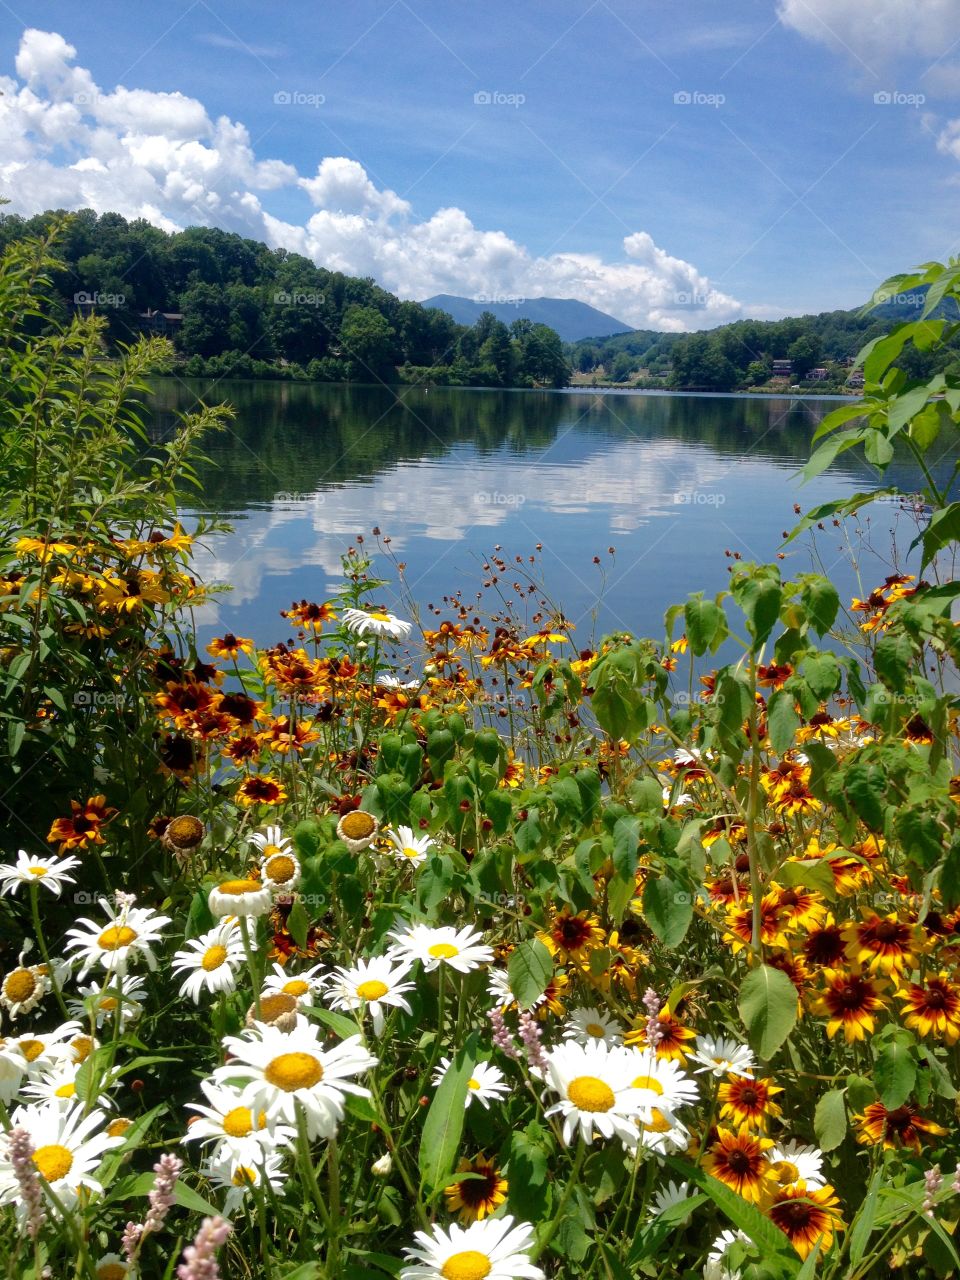 Flowers blooming near by lake